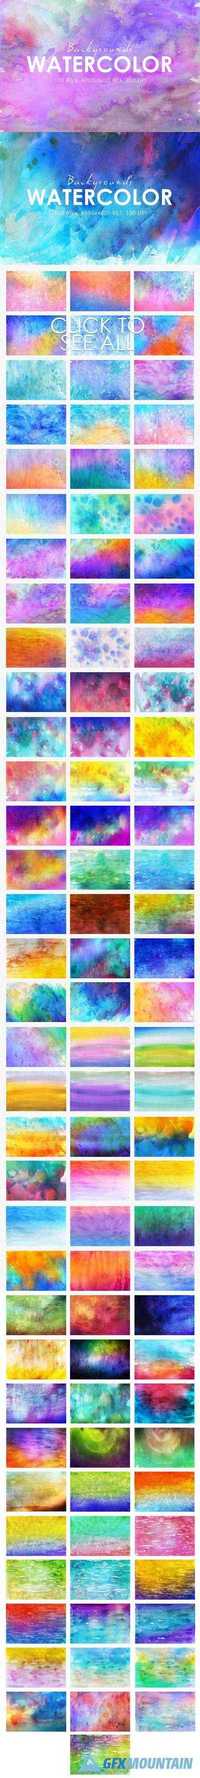 100 Watercolor Backgrounds 2 419250